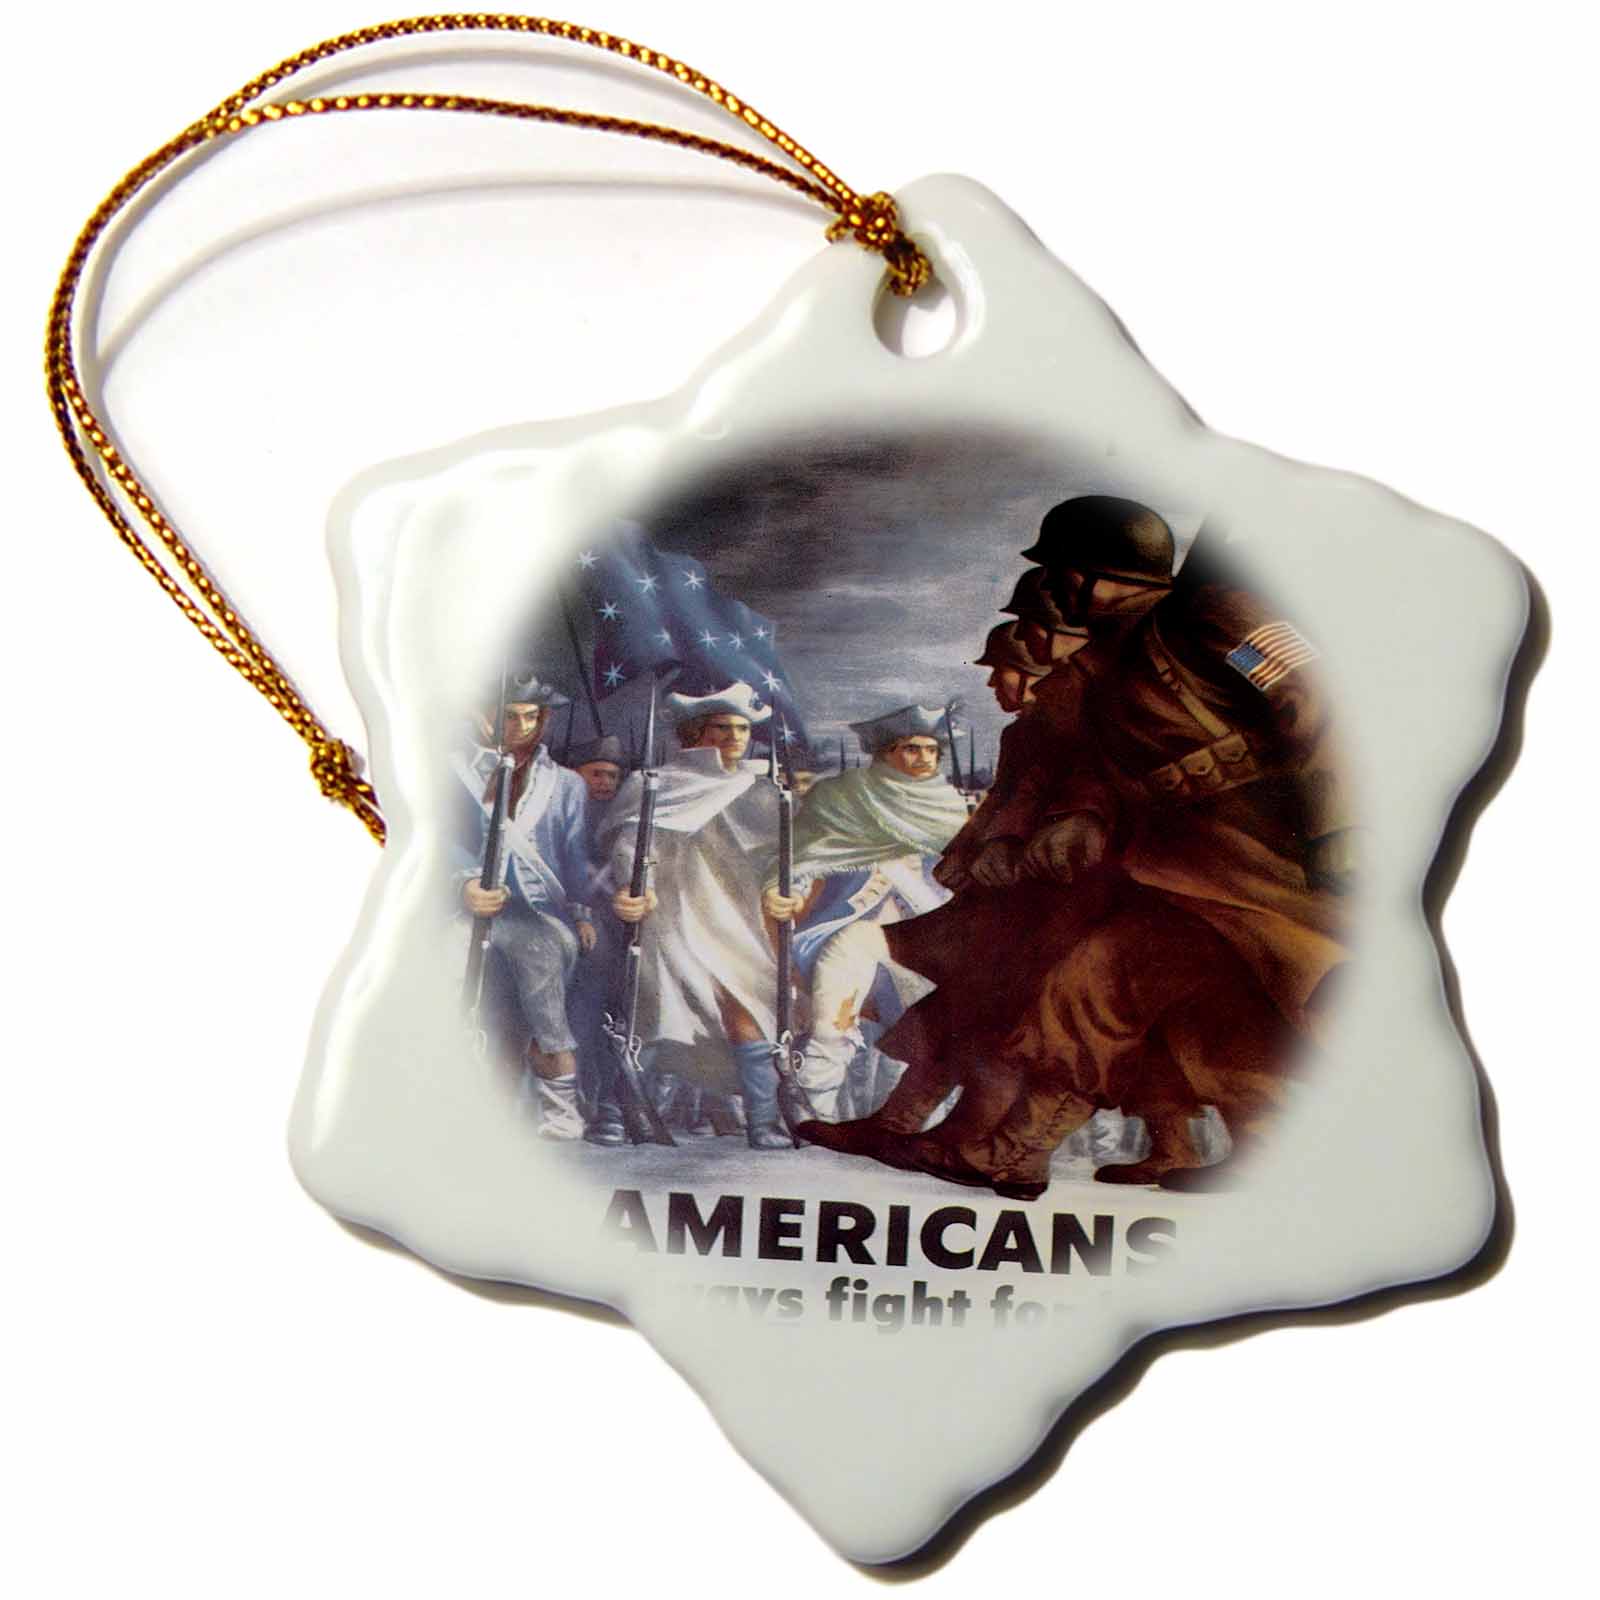 3drose Vintage Americans Will Always Fight For Liberty Poster Multi-Color Porcelain Holiday Decorative Accent Snowflake Ornament, 3" - image 1 of 1